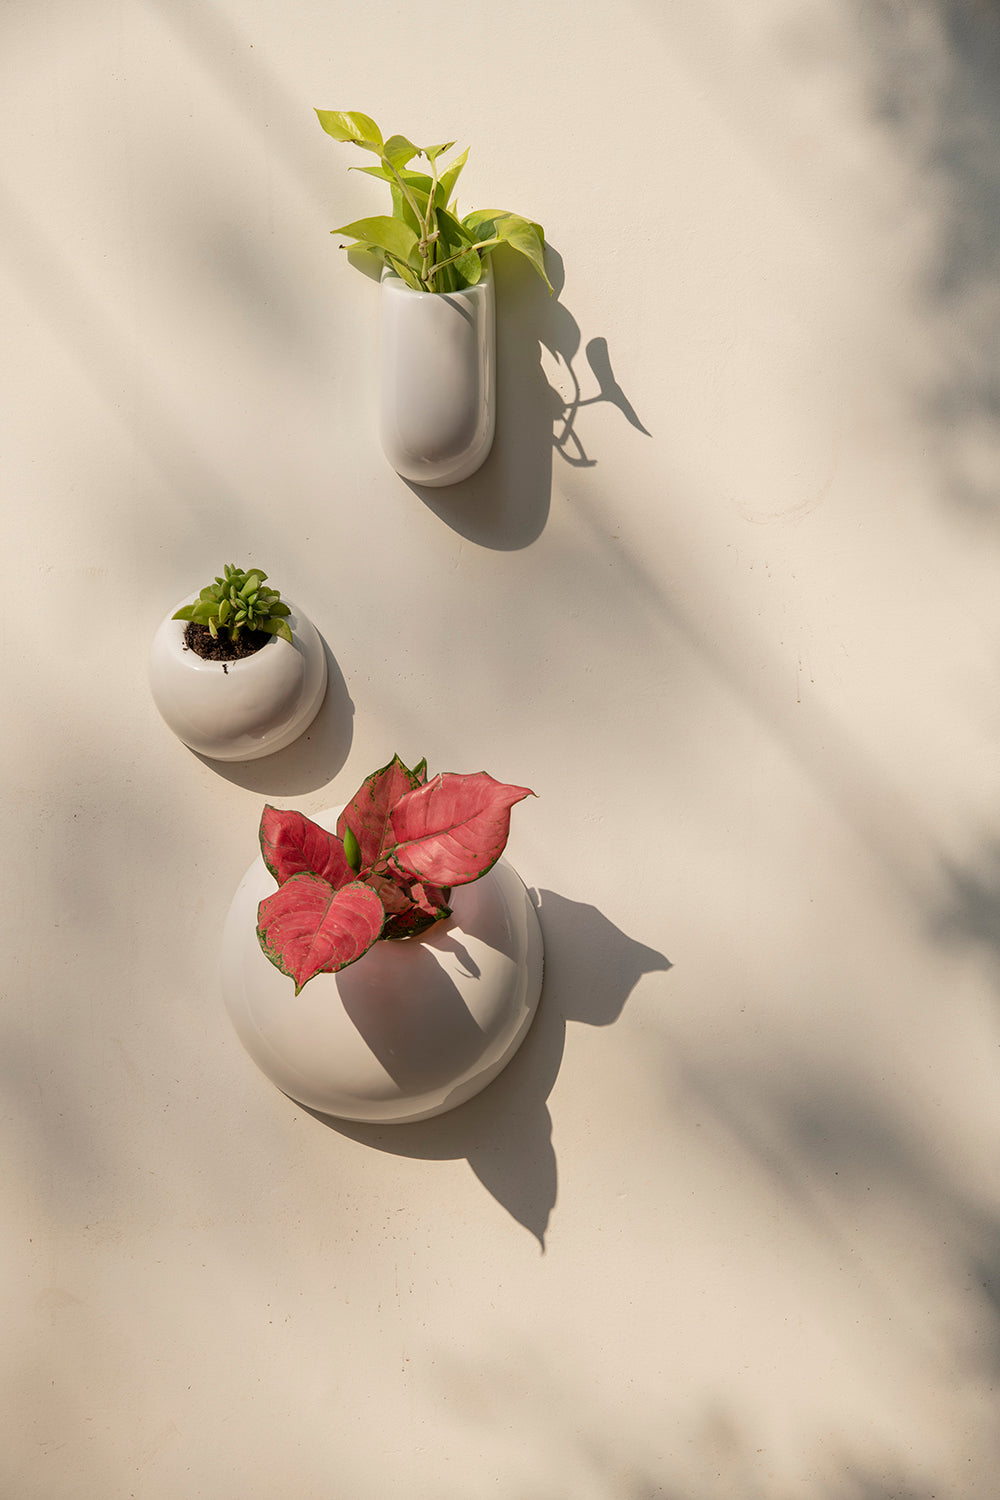 Family of Hanging Solitaires ceramic wall mountain planters in white color in three various sizes with plants Nailed to the wall.